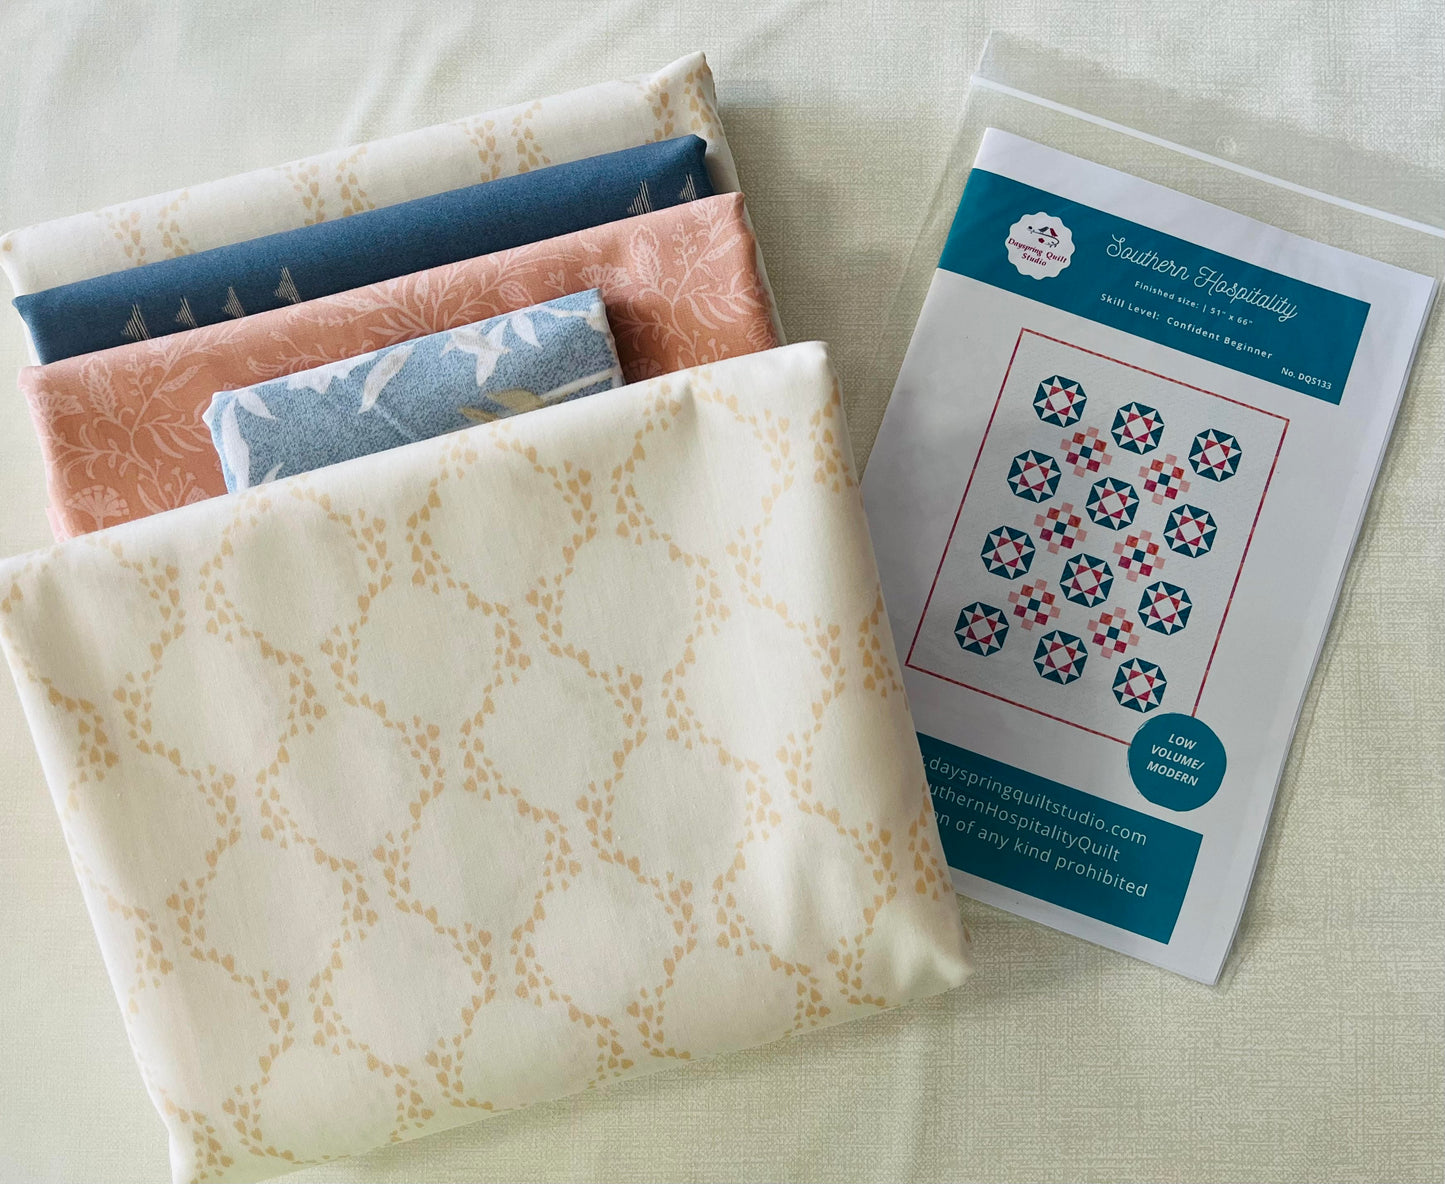 Southern Hospitality Quilt Kit